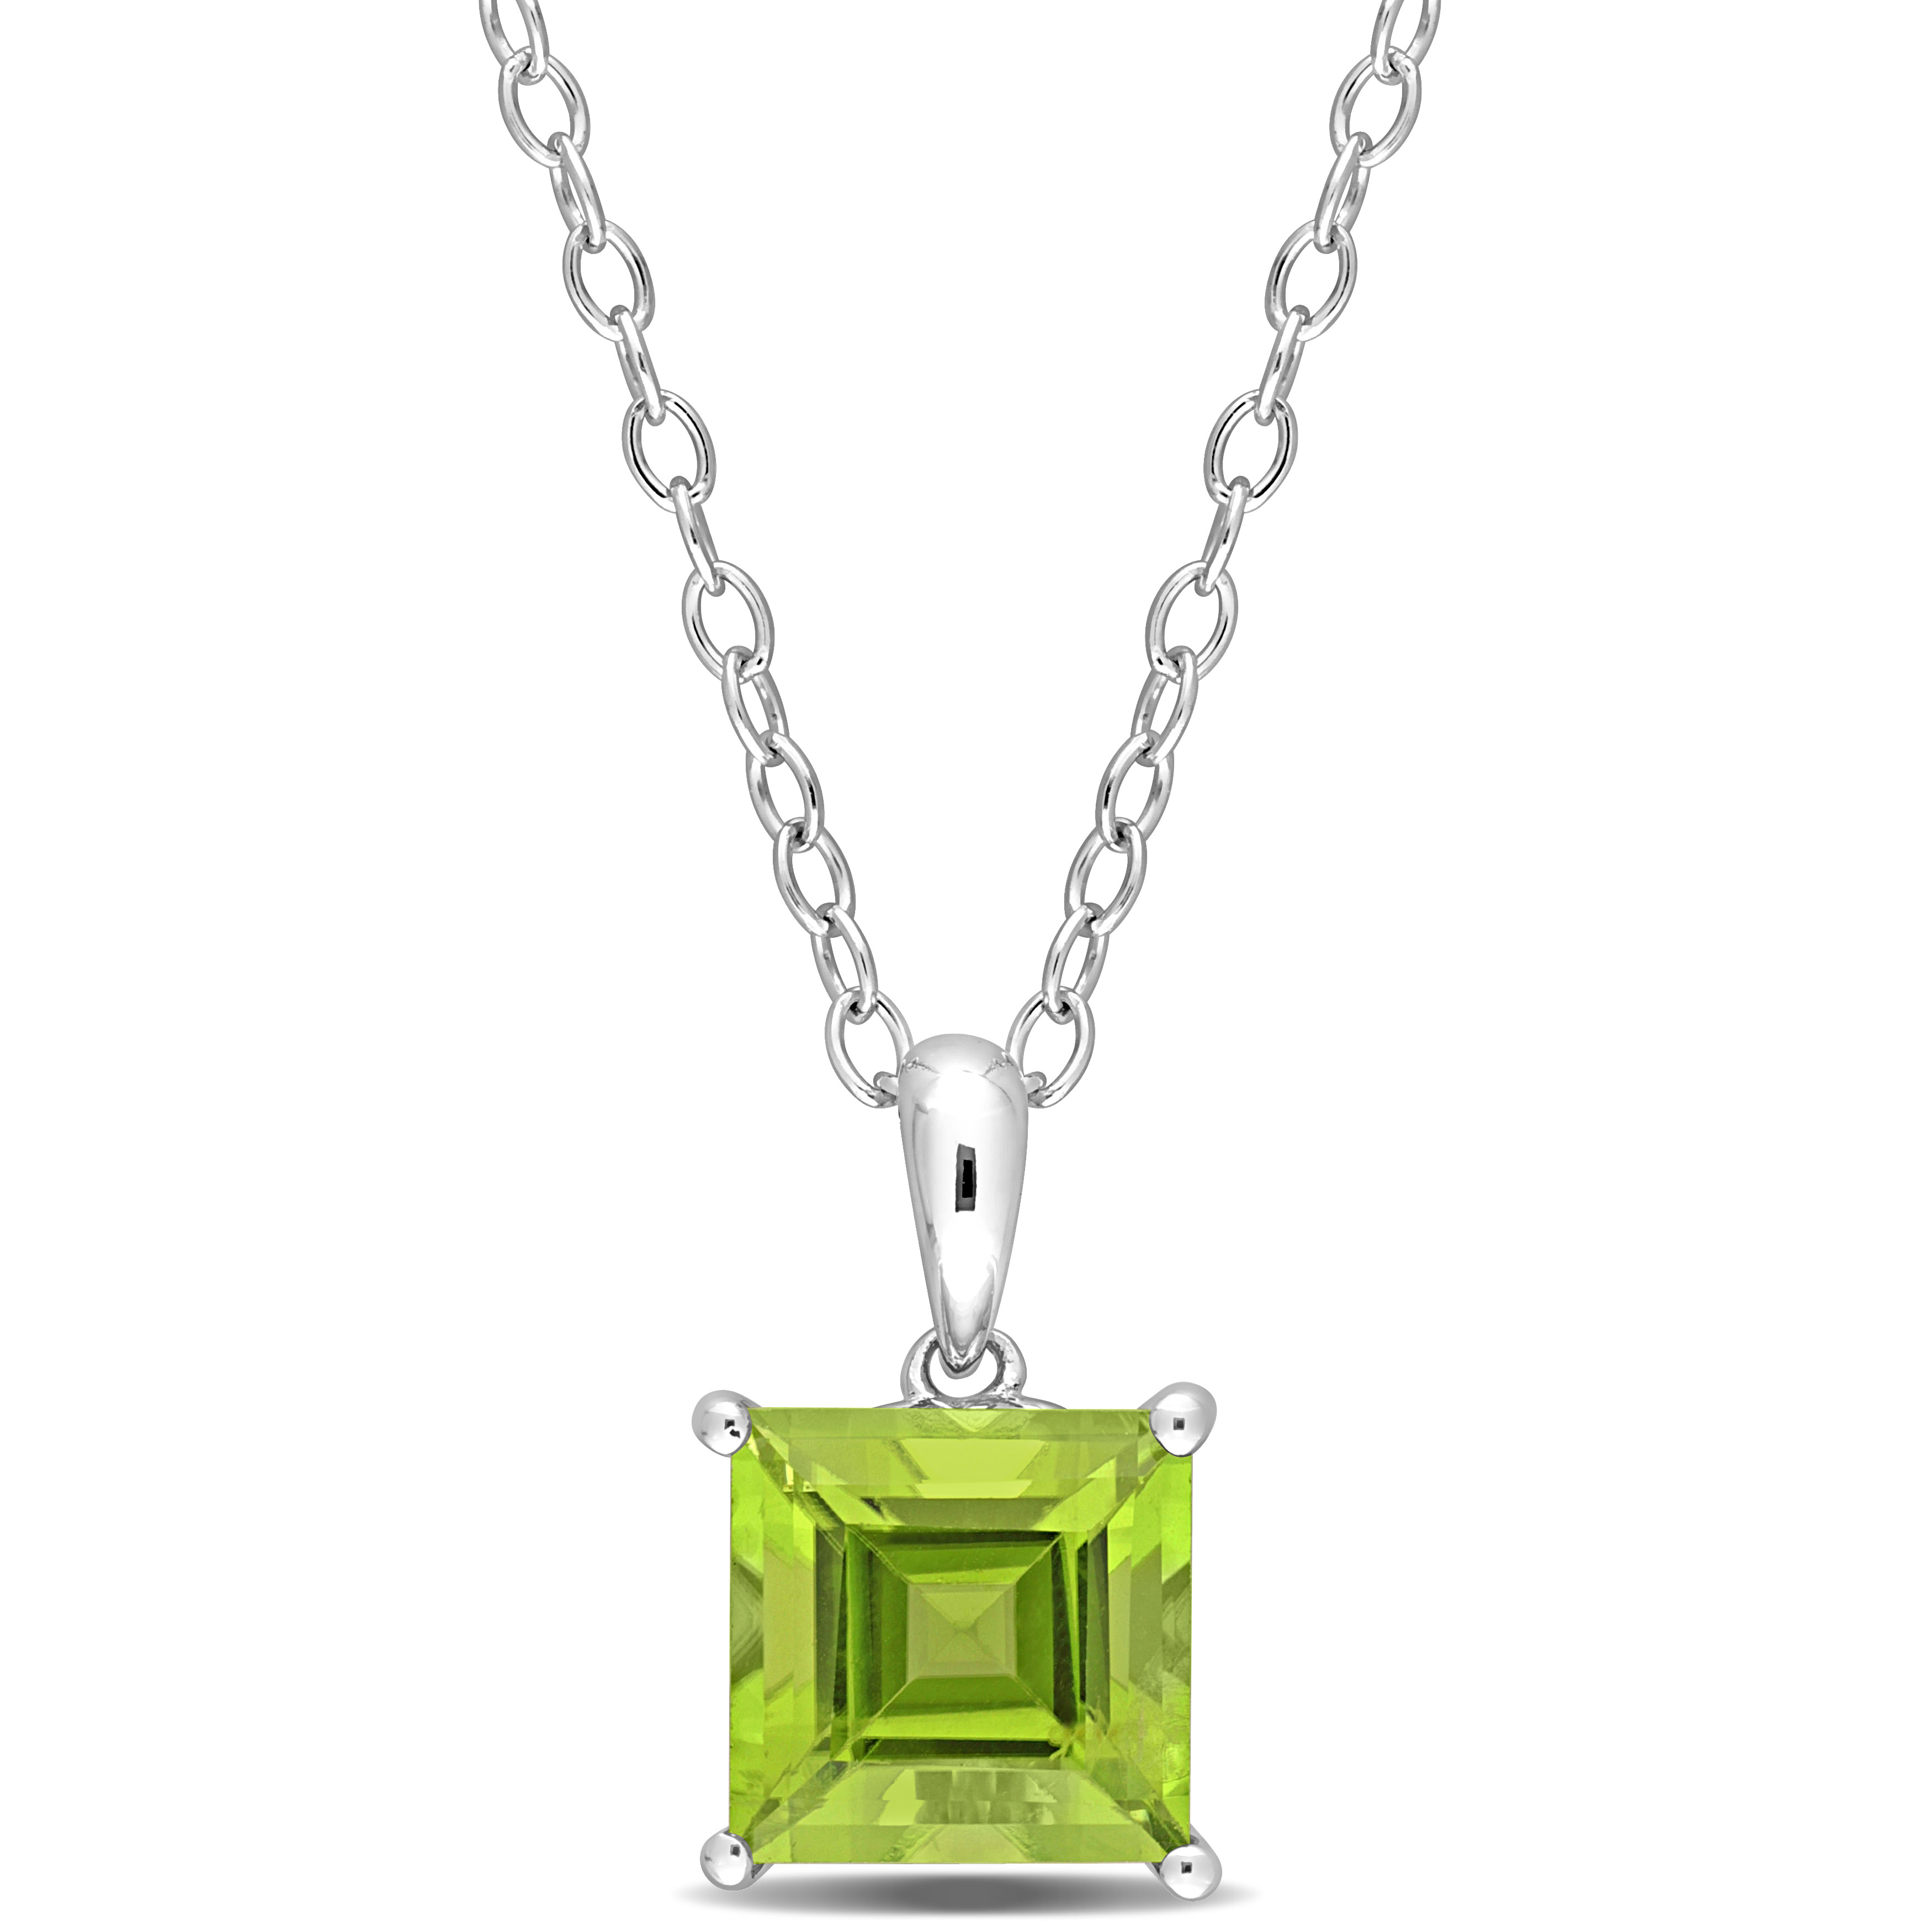 2 3/4 CT TGW Princess Cut Peridot Solitaire Heart Design Pendant with Chain in Sterling Silver - 18 in.